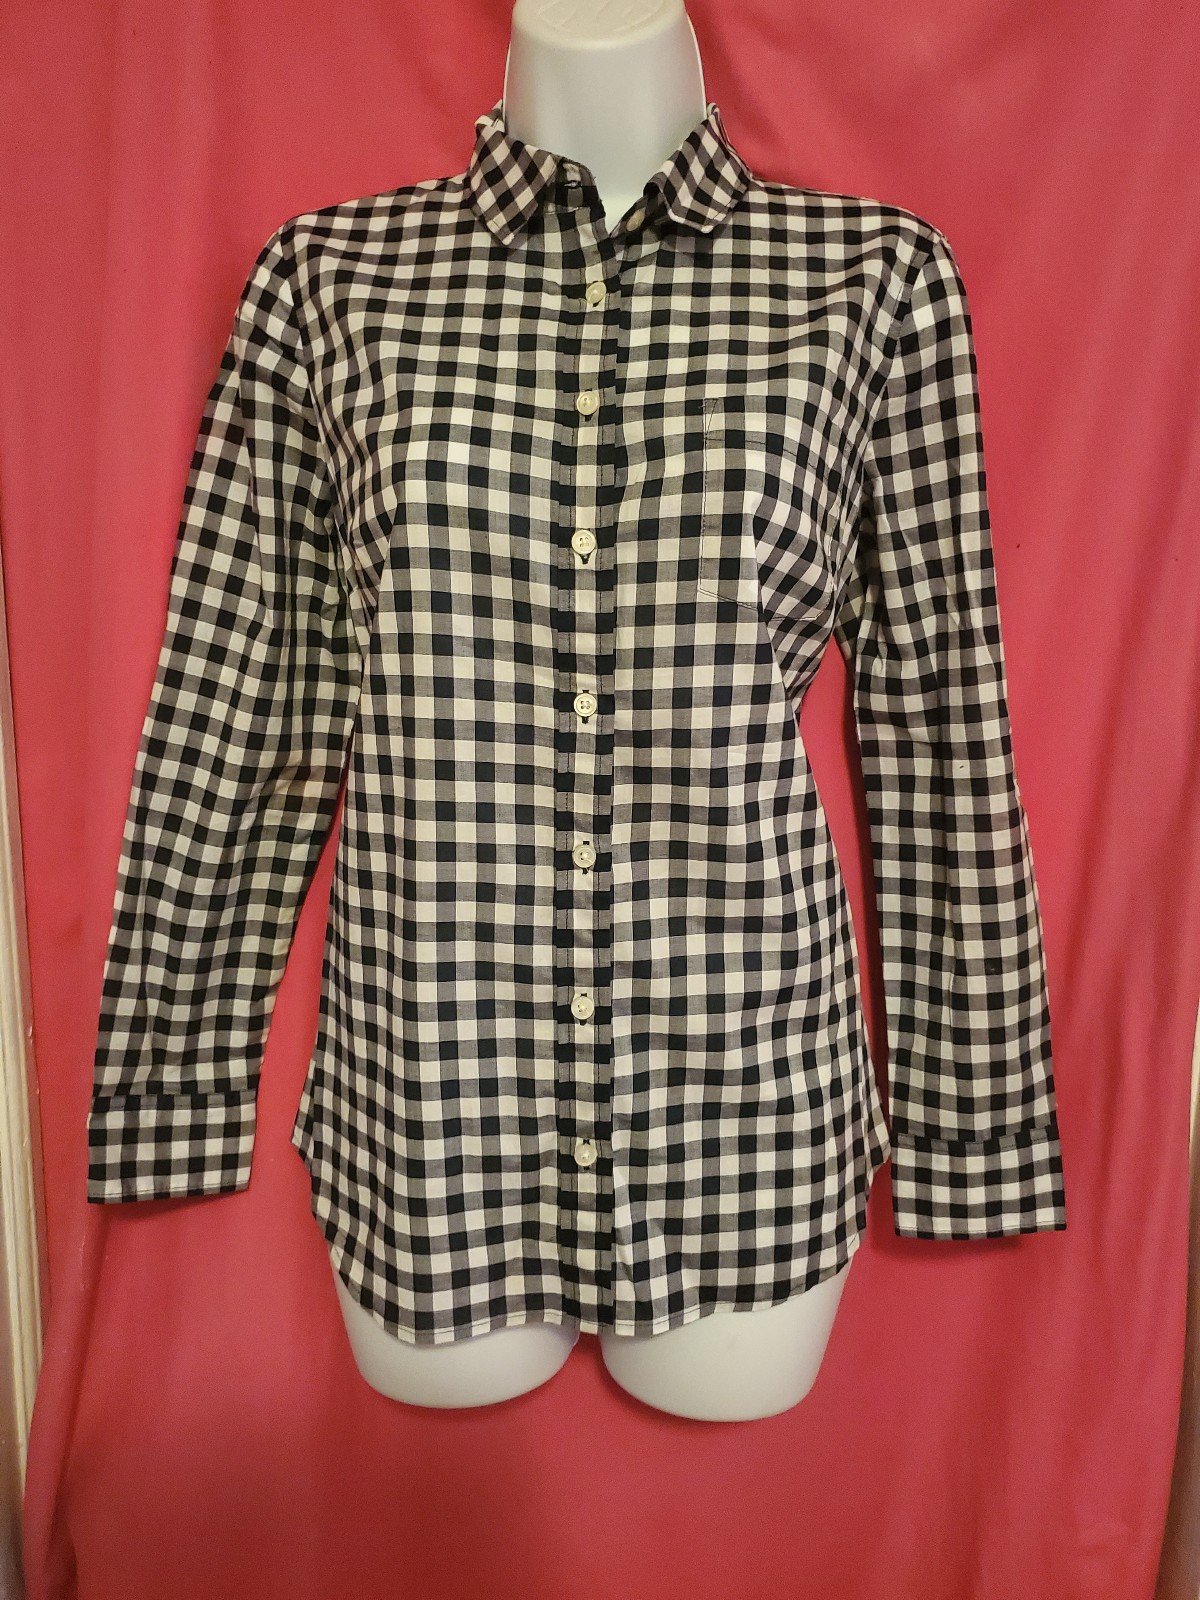 Amazing #1183 New With Tags J. Crew top ng8AqUjWd US Ou